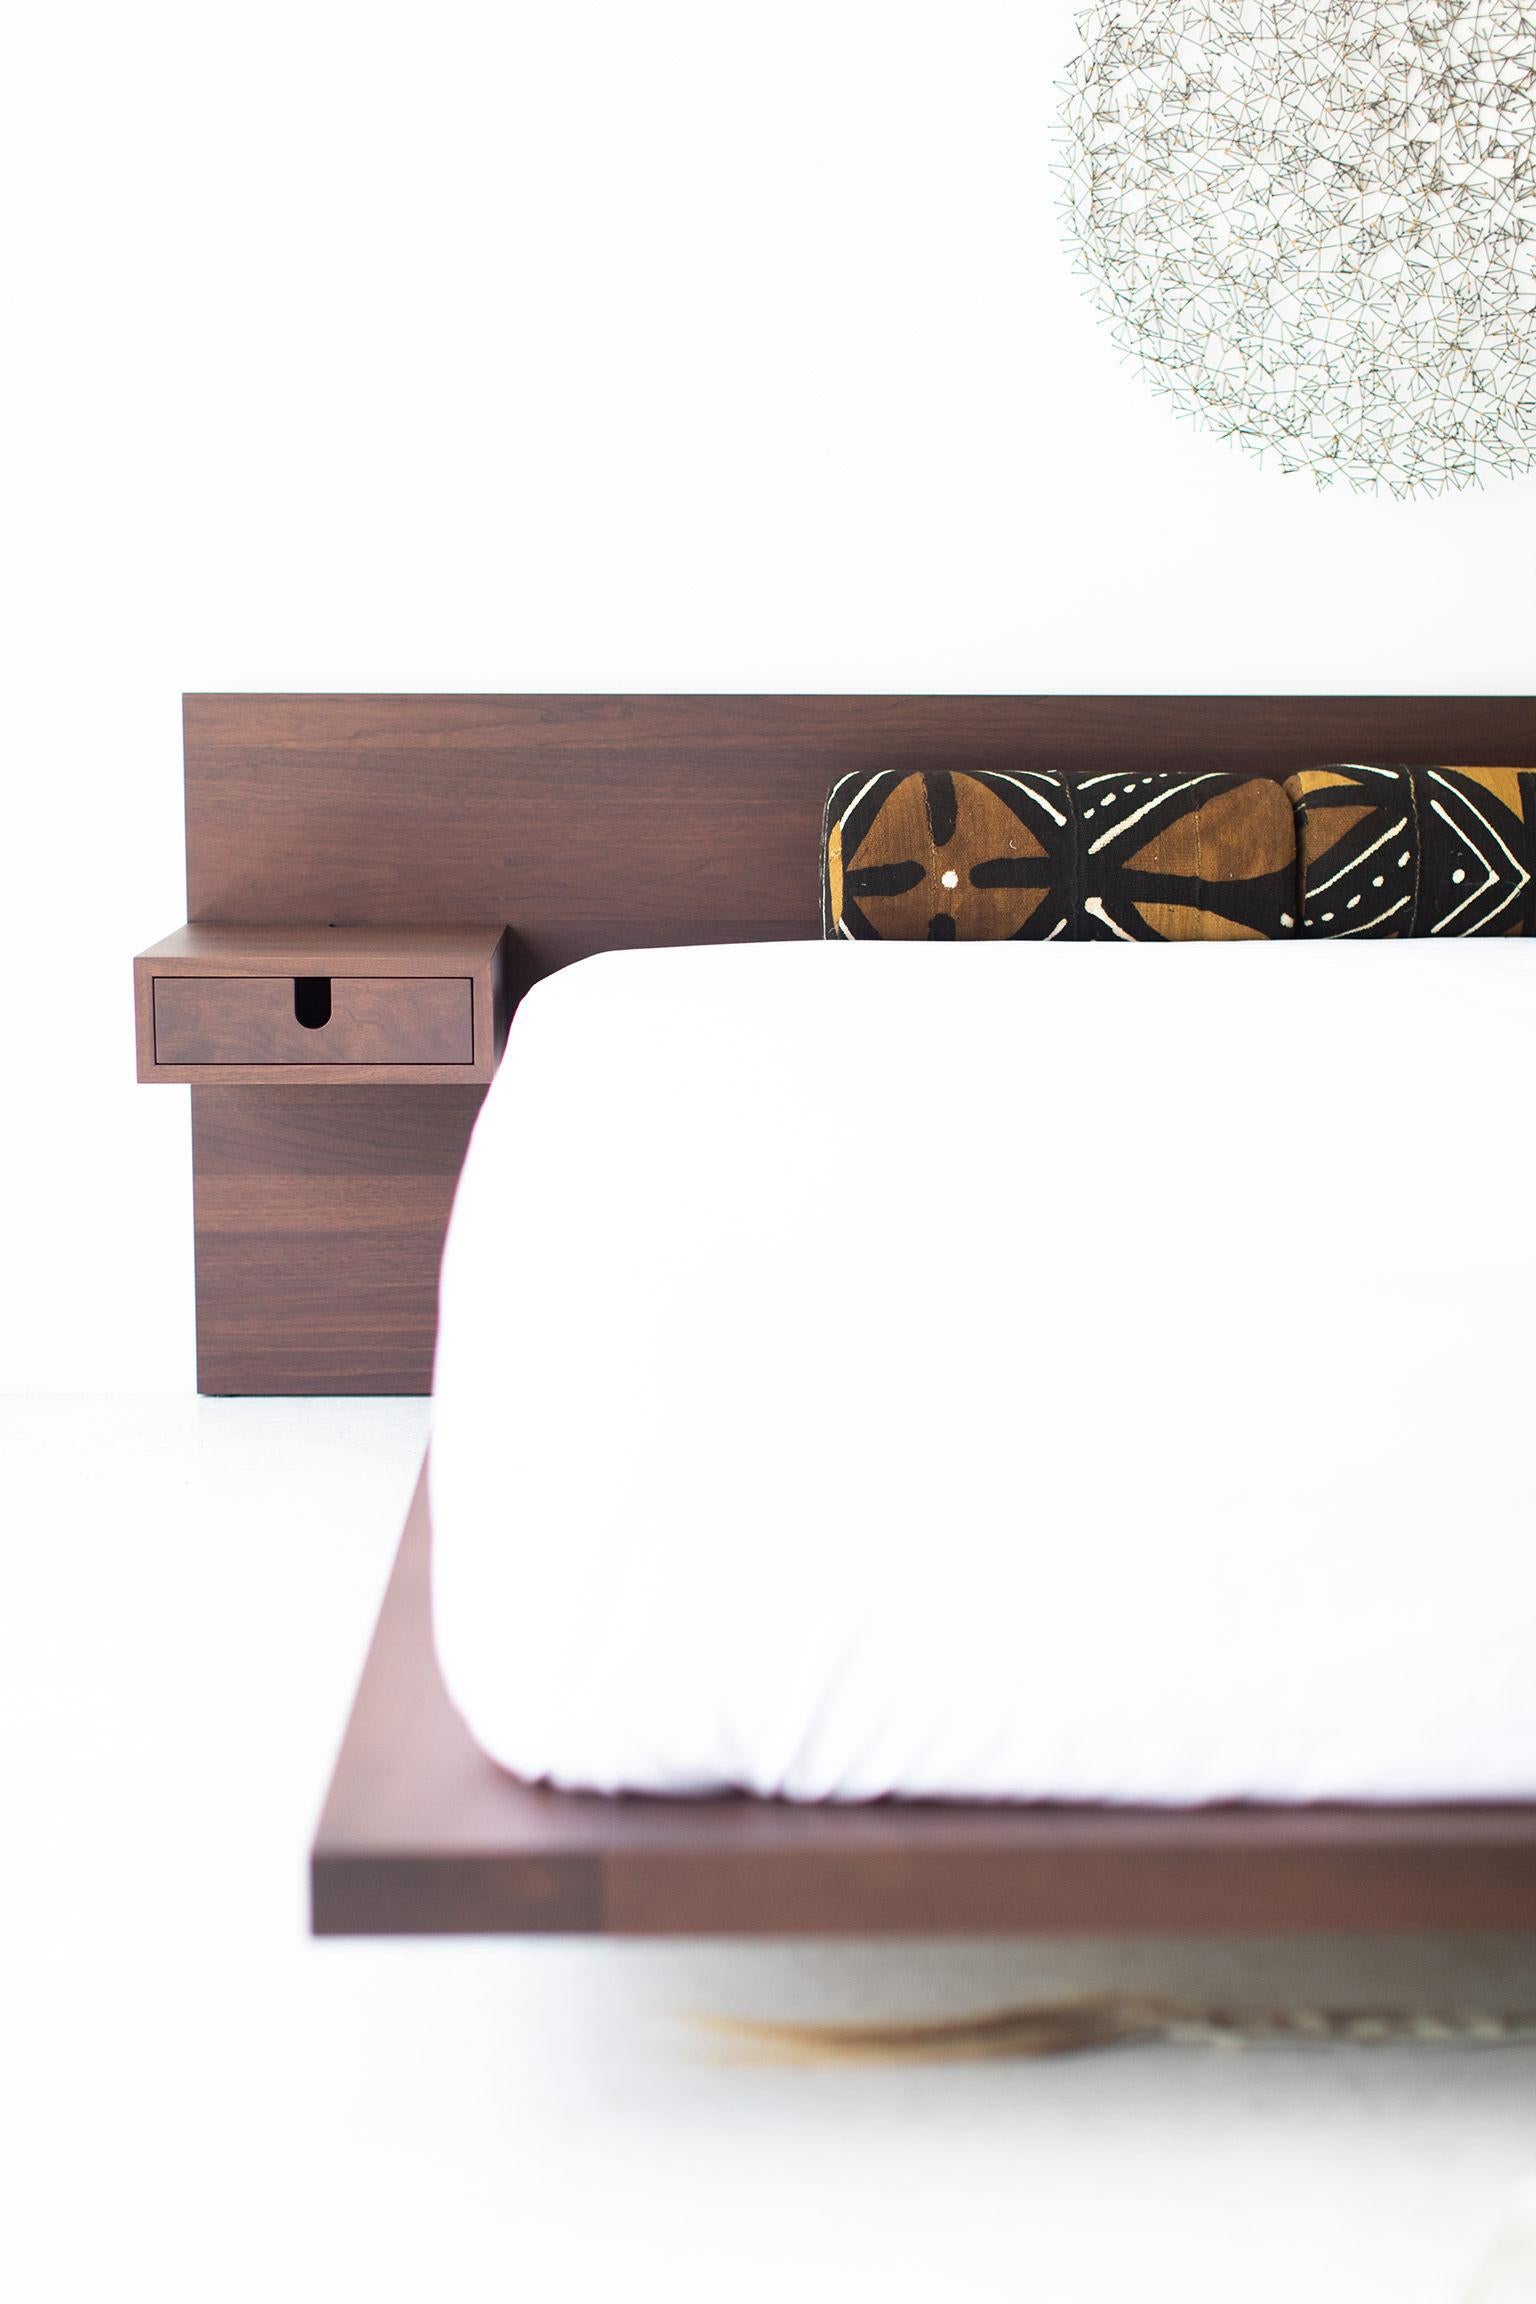 This is a custom listing for Monique. The price includes 3 King sized beds at 15% discount as discussed.
The shipping cost will be added by the 1stDibs team.

This modern platform bed is made in the heart of Ohio with locally sourced wood. Each